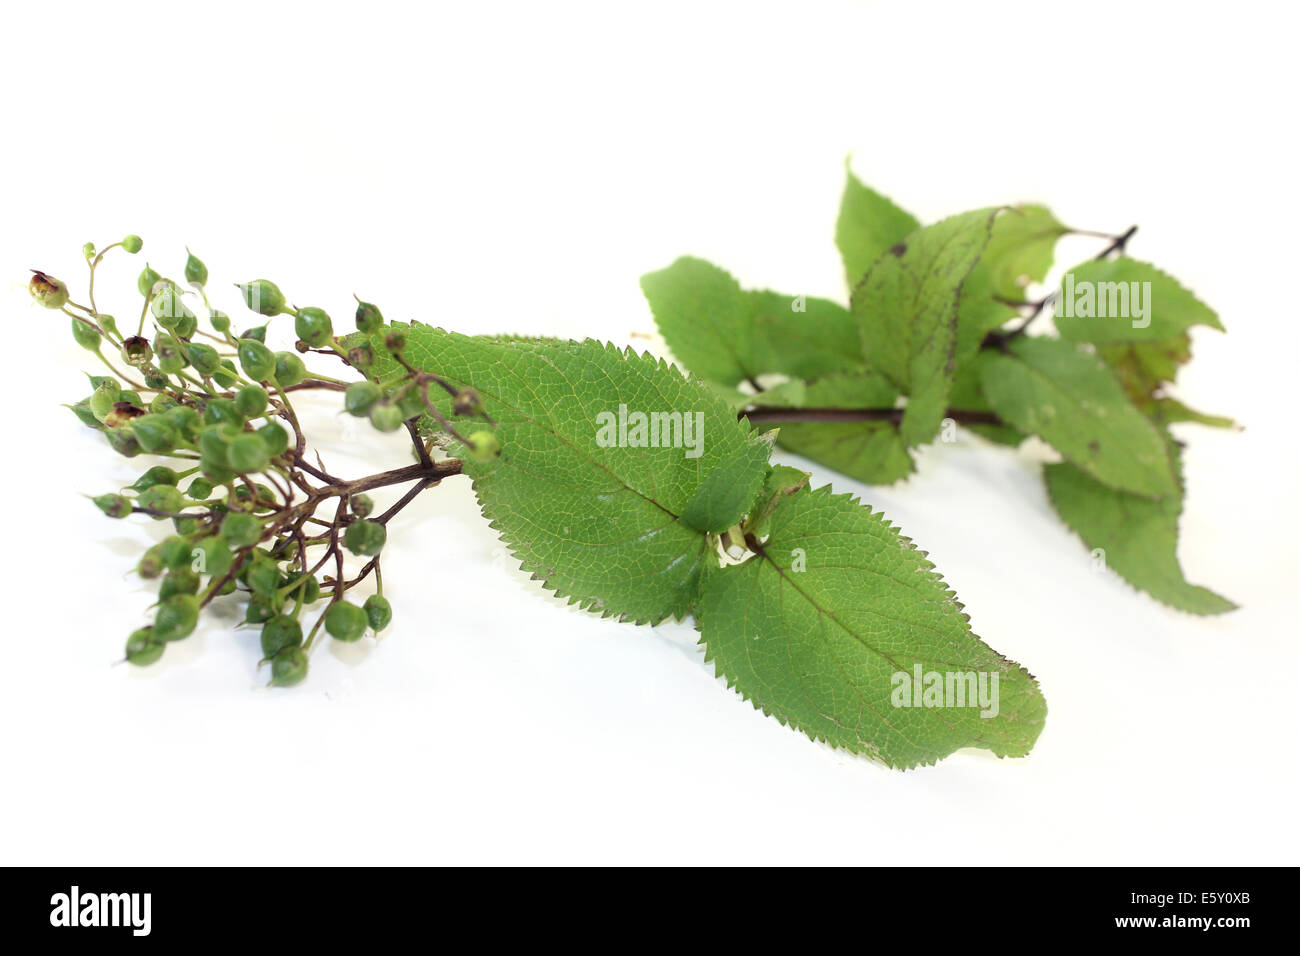 Chinese medicinal herb on a white background Stock Photo